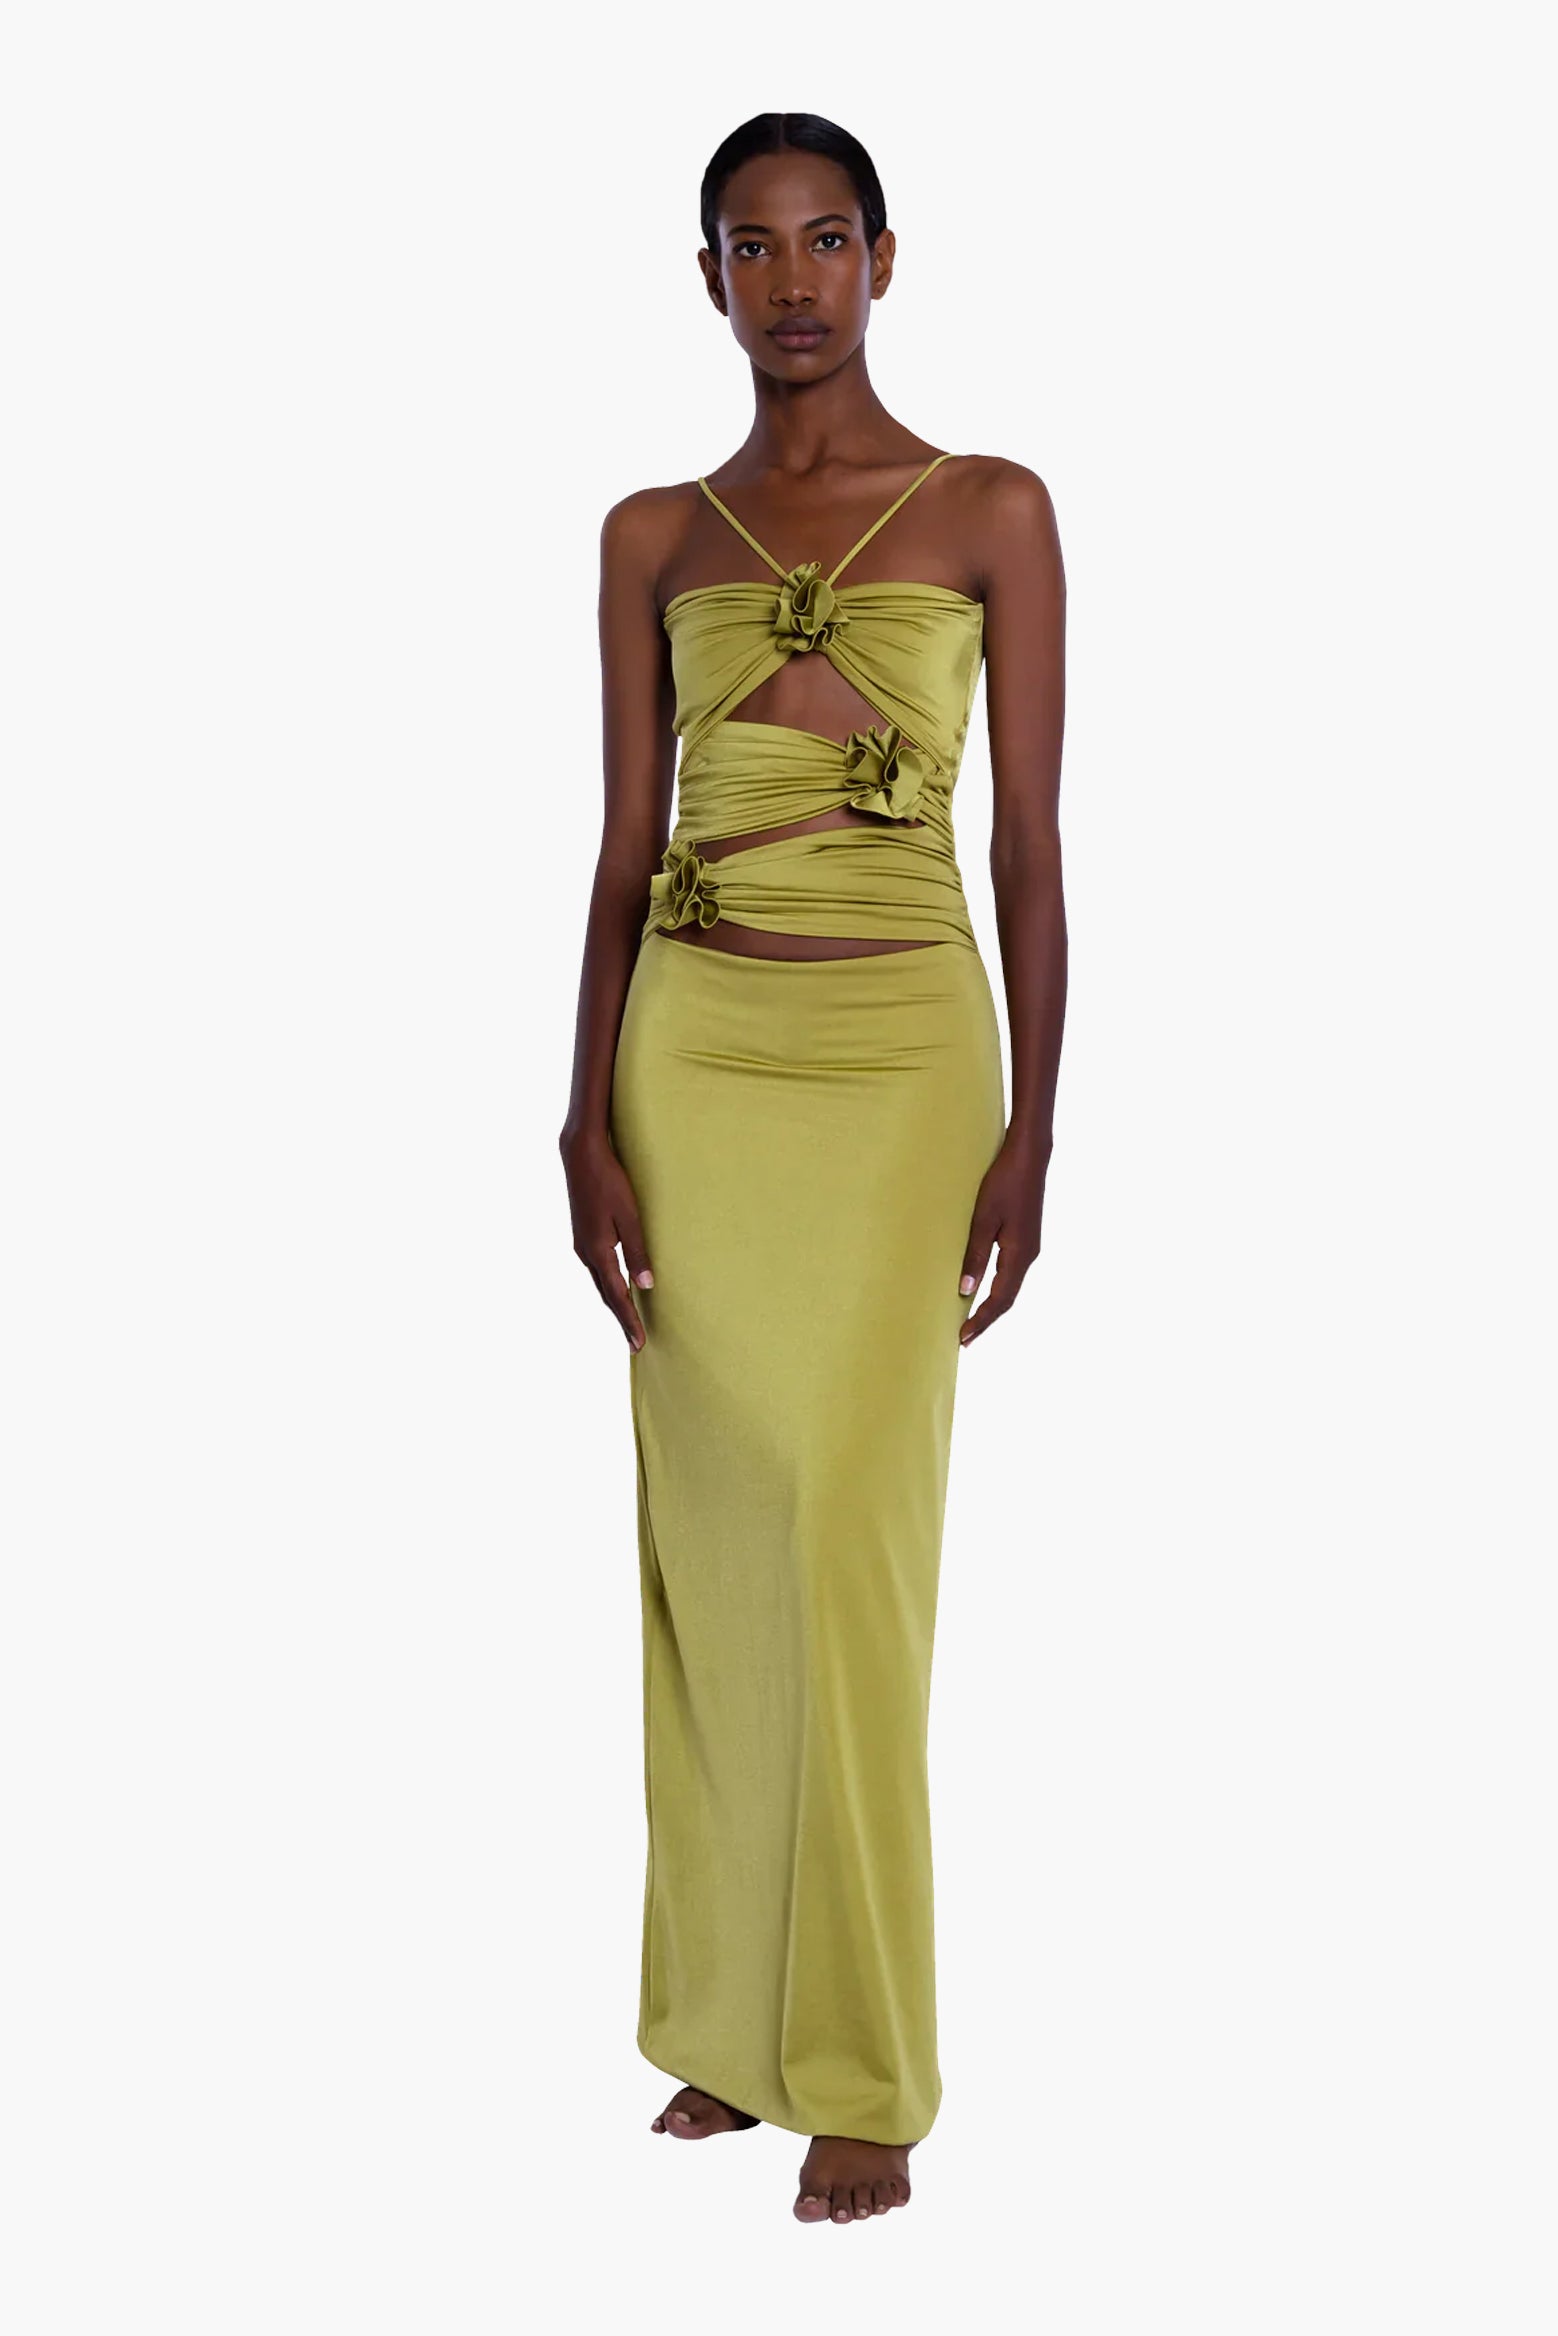 Maygel Coronel Veranera Dress in Pascolo Green available at The New Trend Australia.